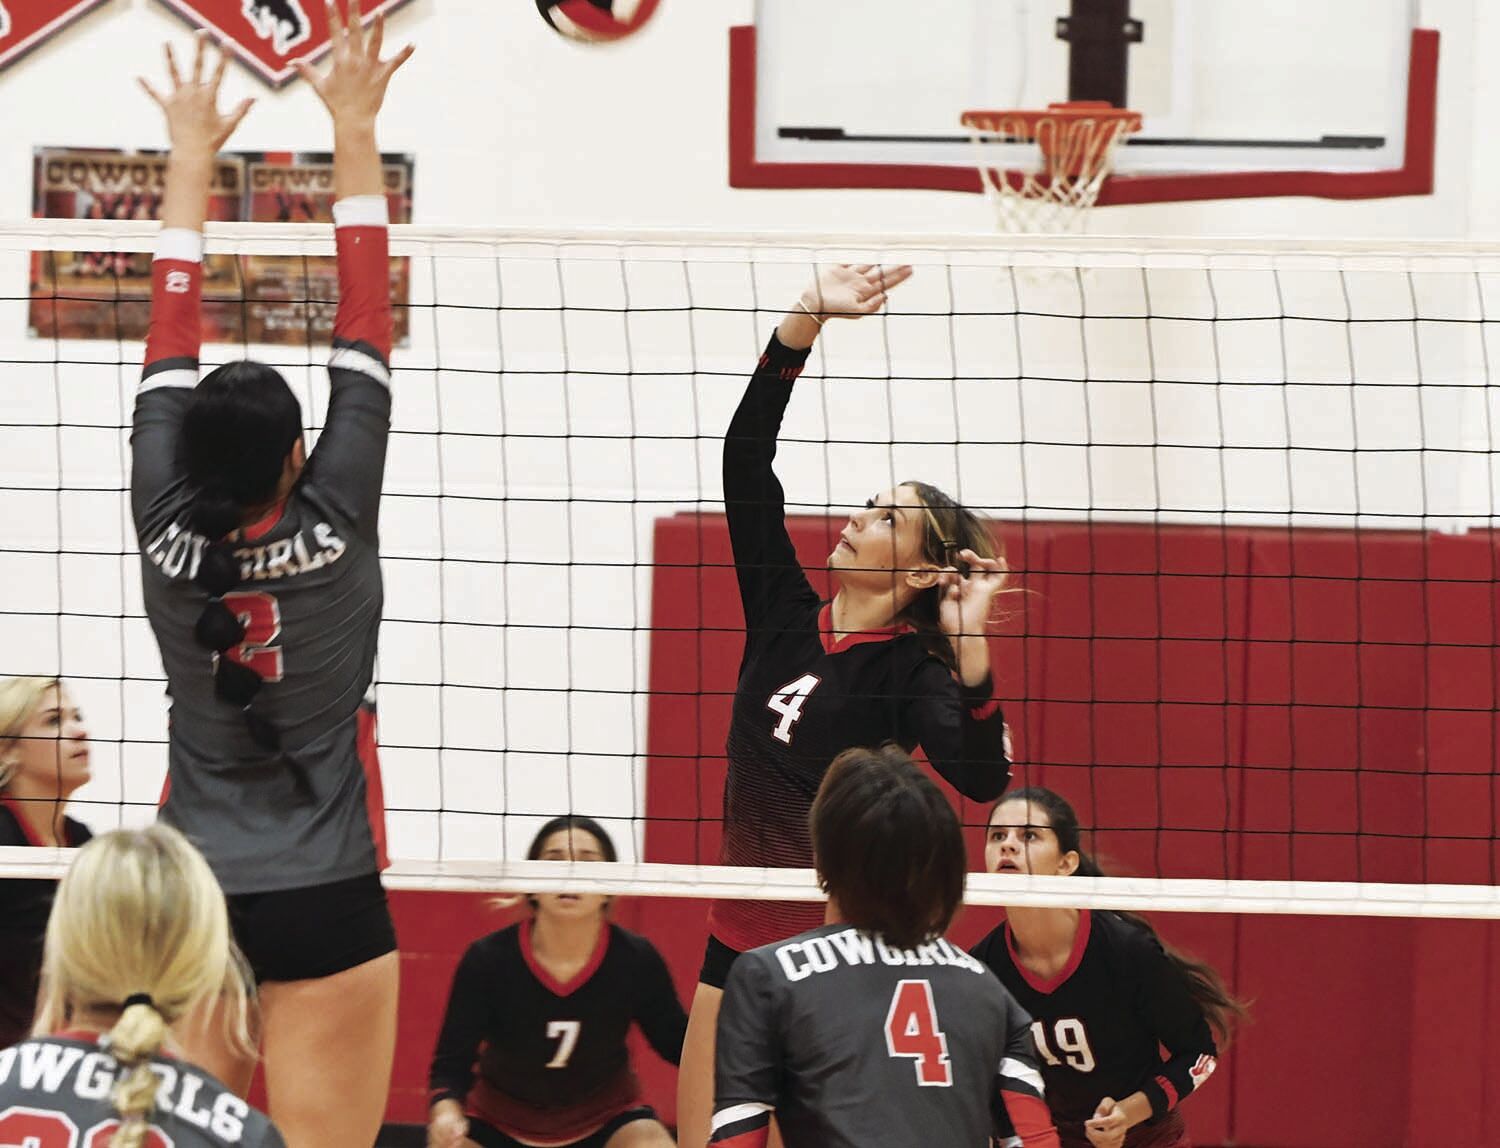 Sidney Cowgirls Dominate Against Essex Volleyball Team in 3-0 Victory